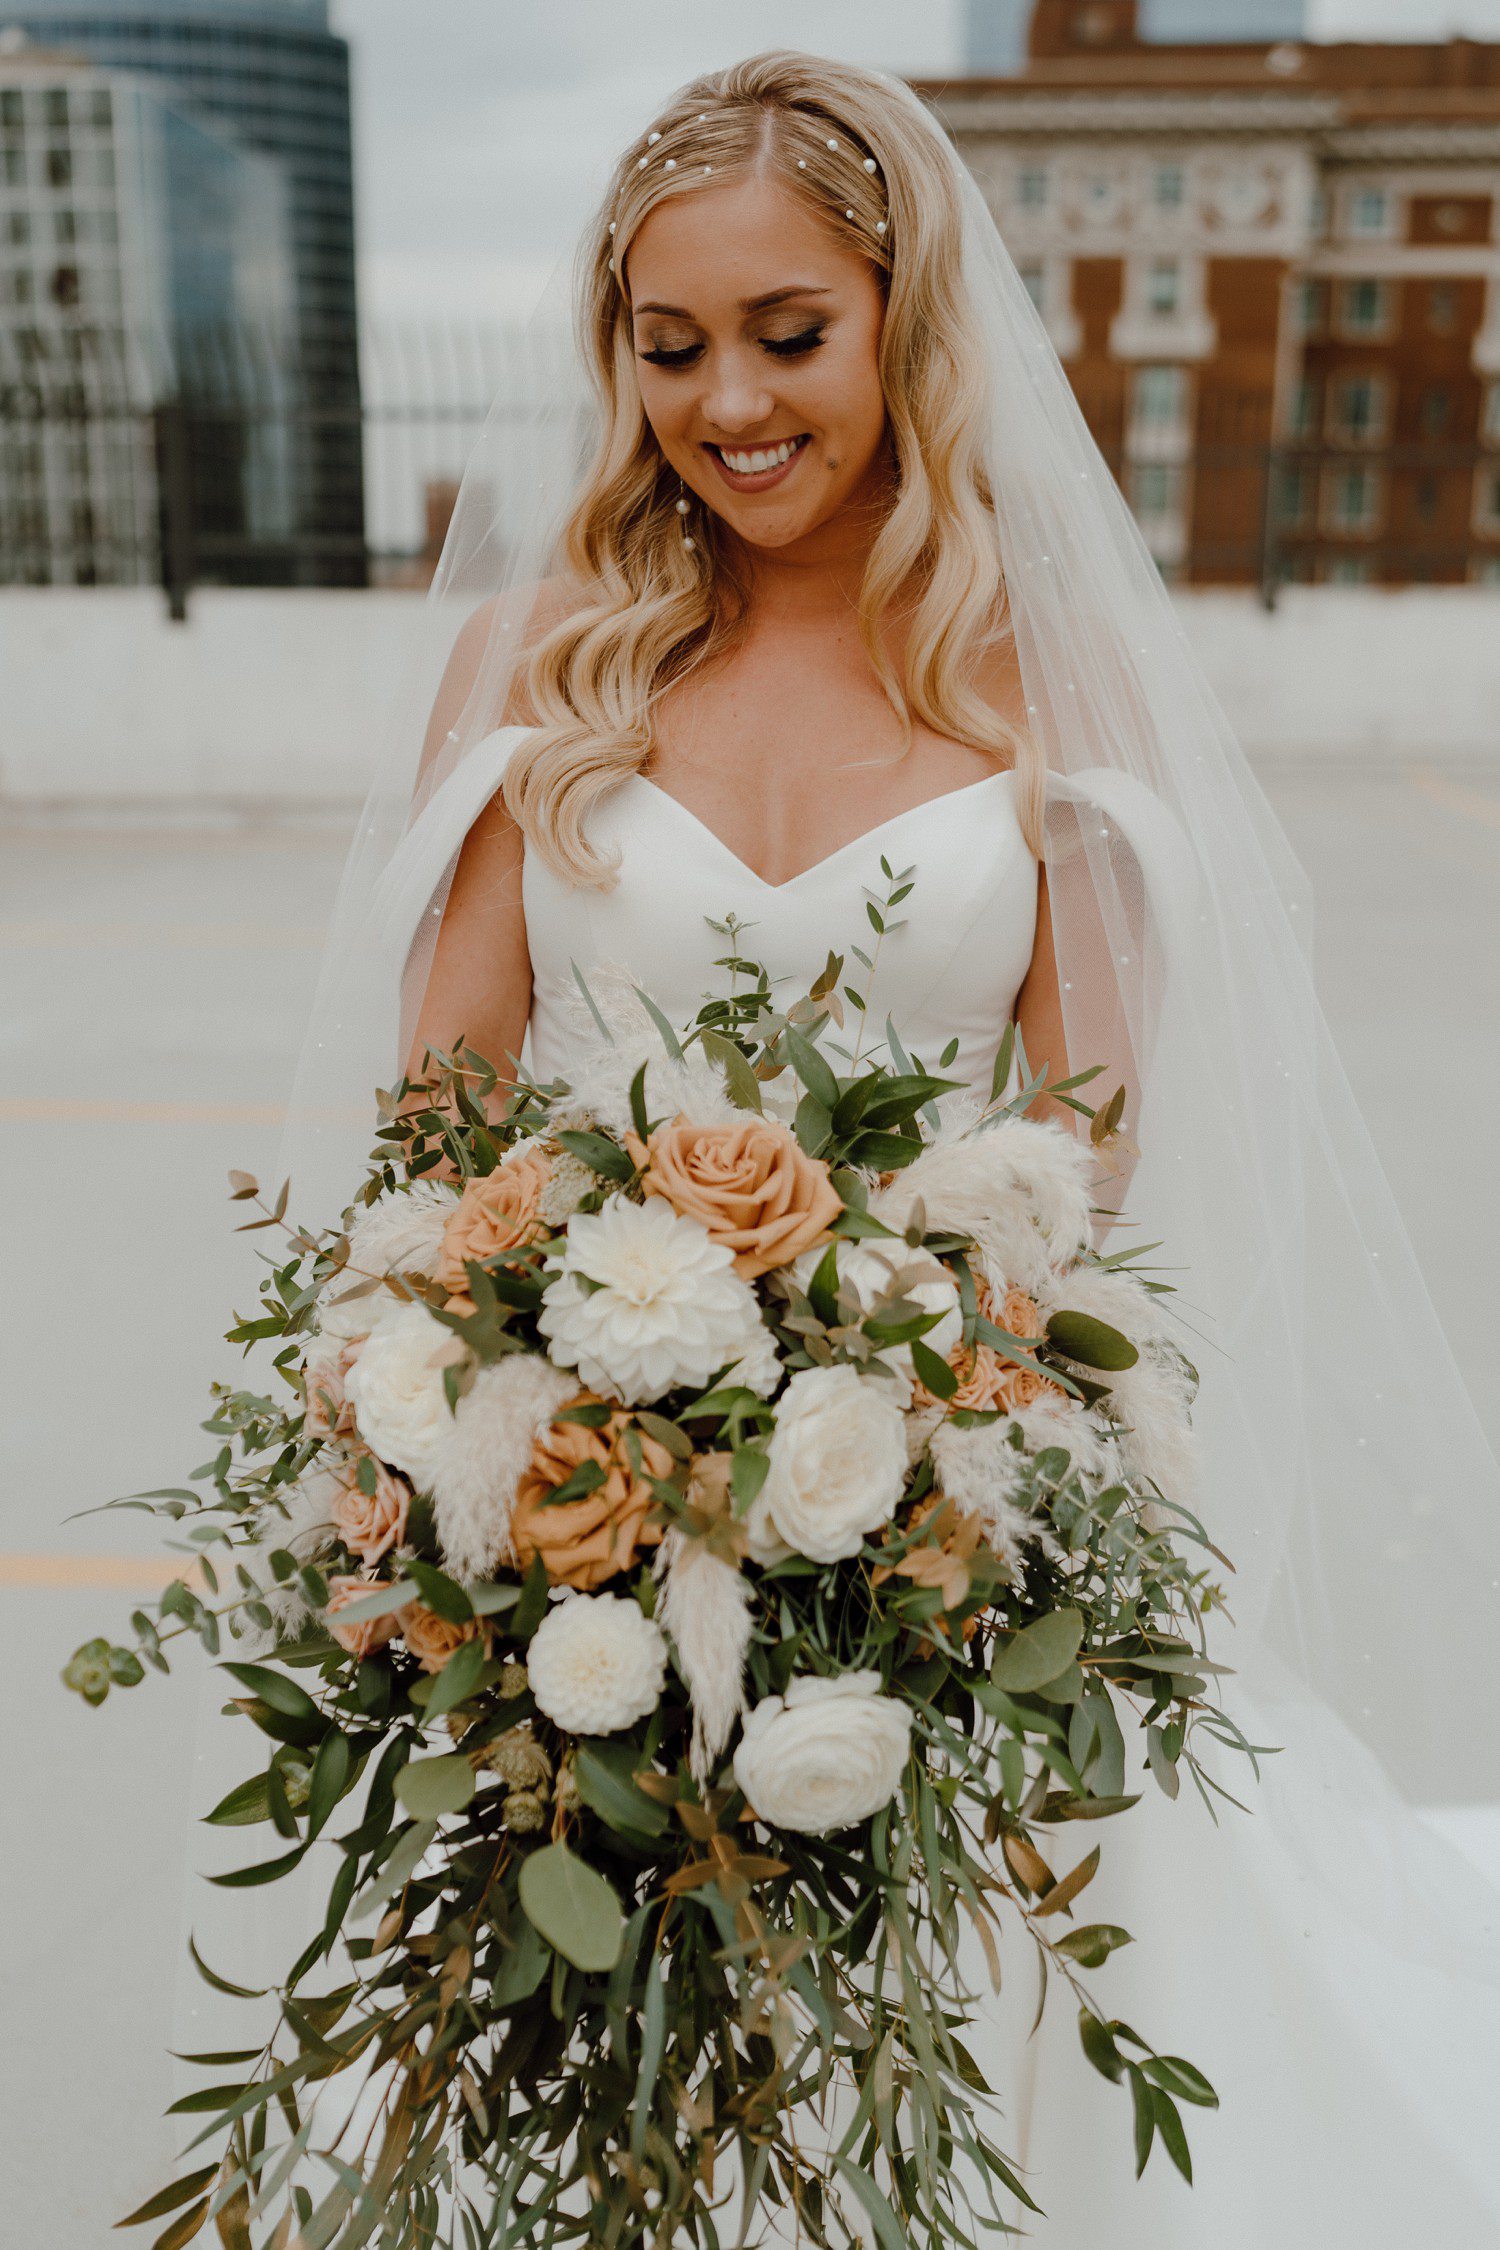 Rooftop bridal portraits in downtown Grand Rapids.